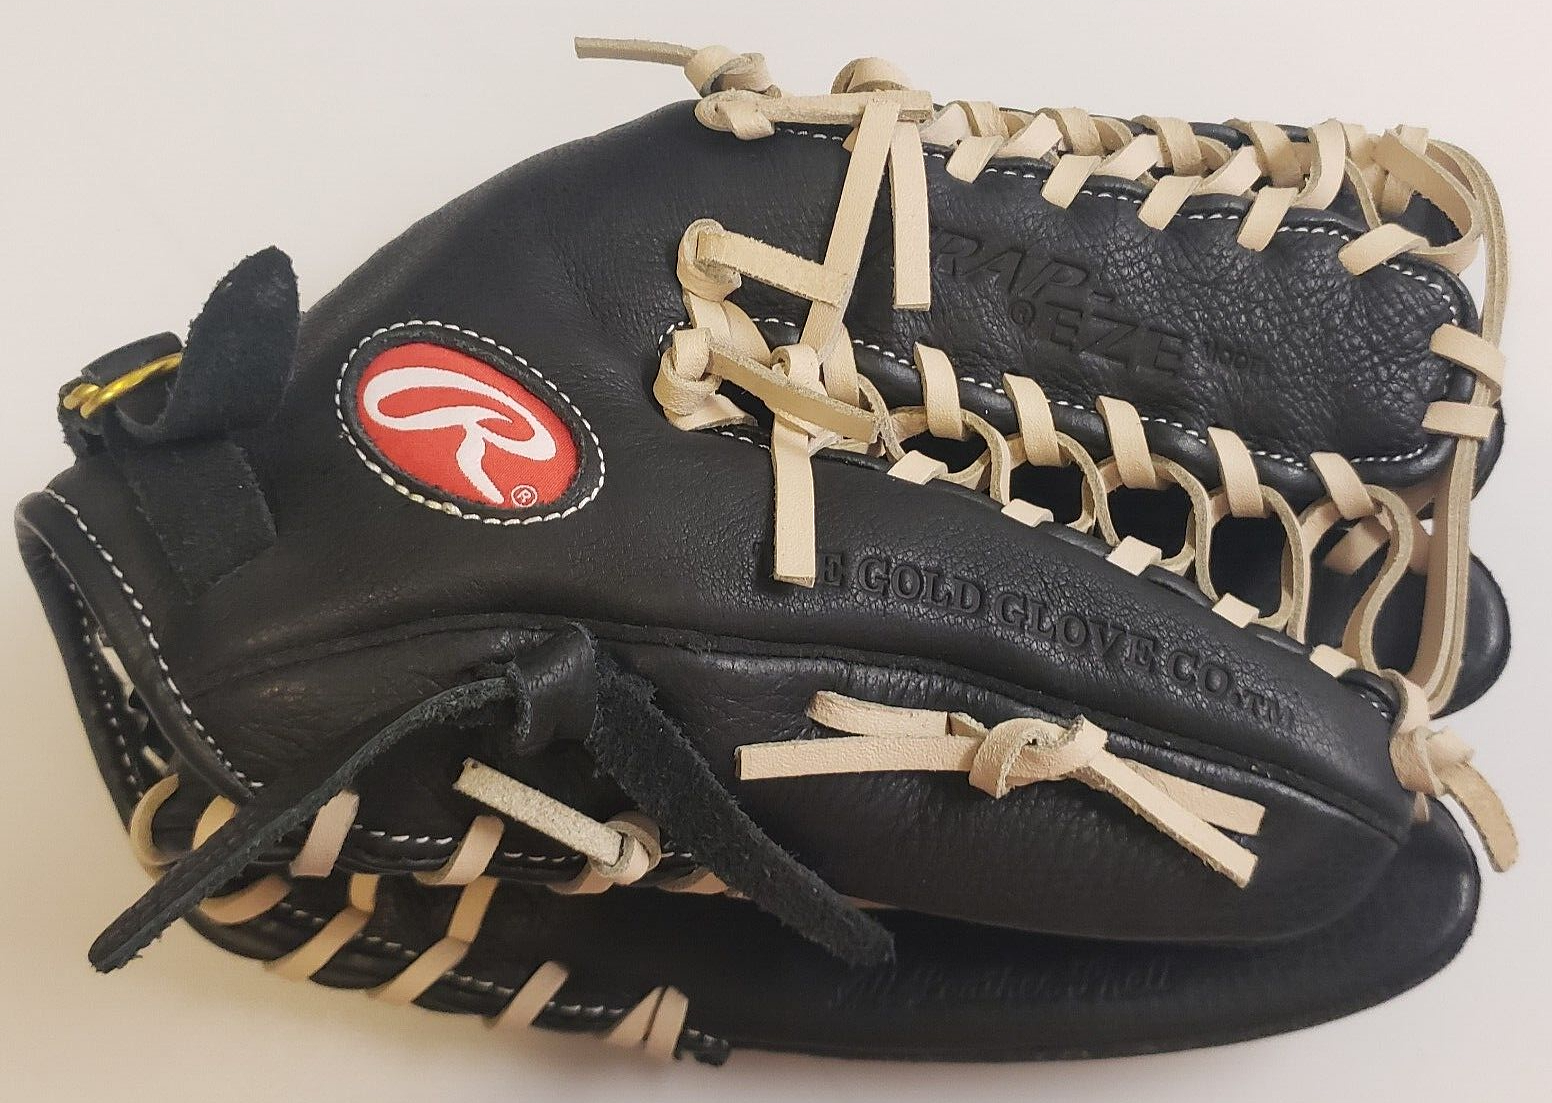 Primary image for RAWLINGS Trap-Eze BASEBALL Gold Glove Co TP1225T Black Leather 12-1/4" PRO TAPER